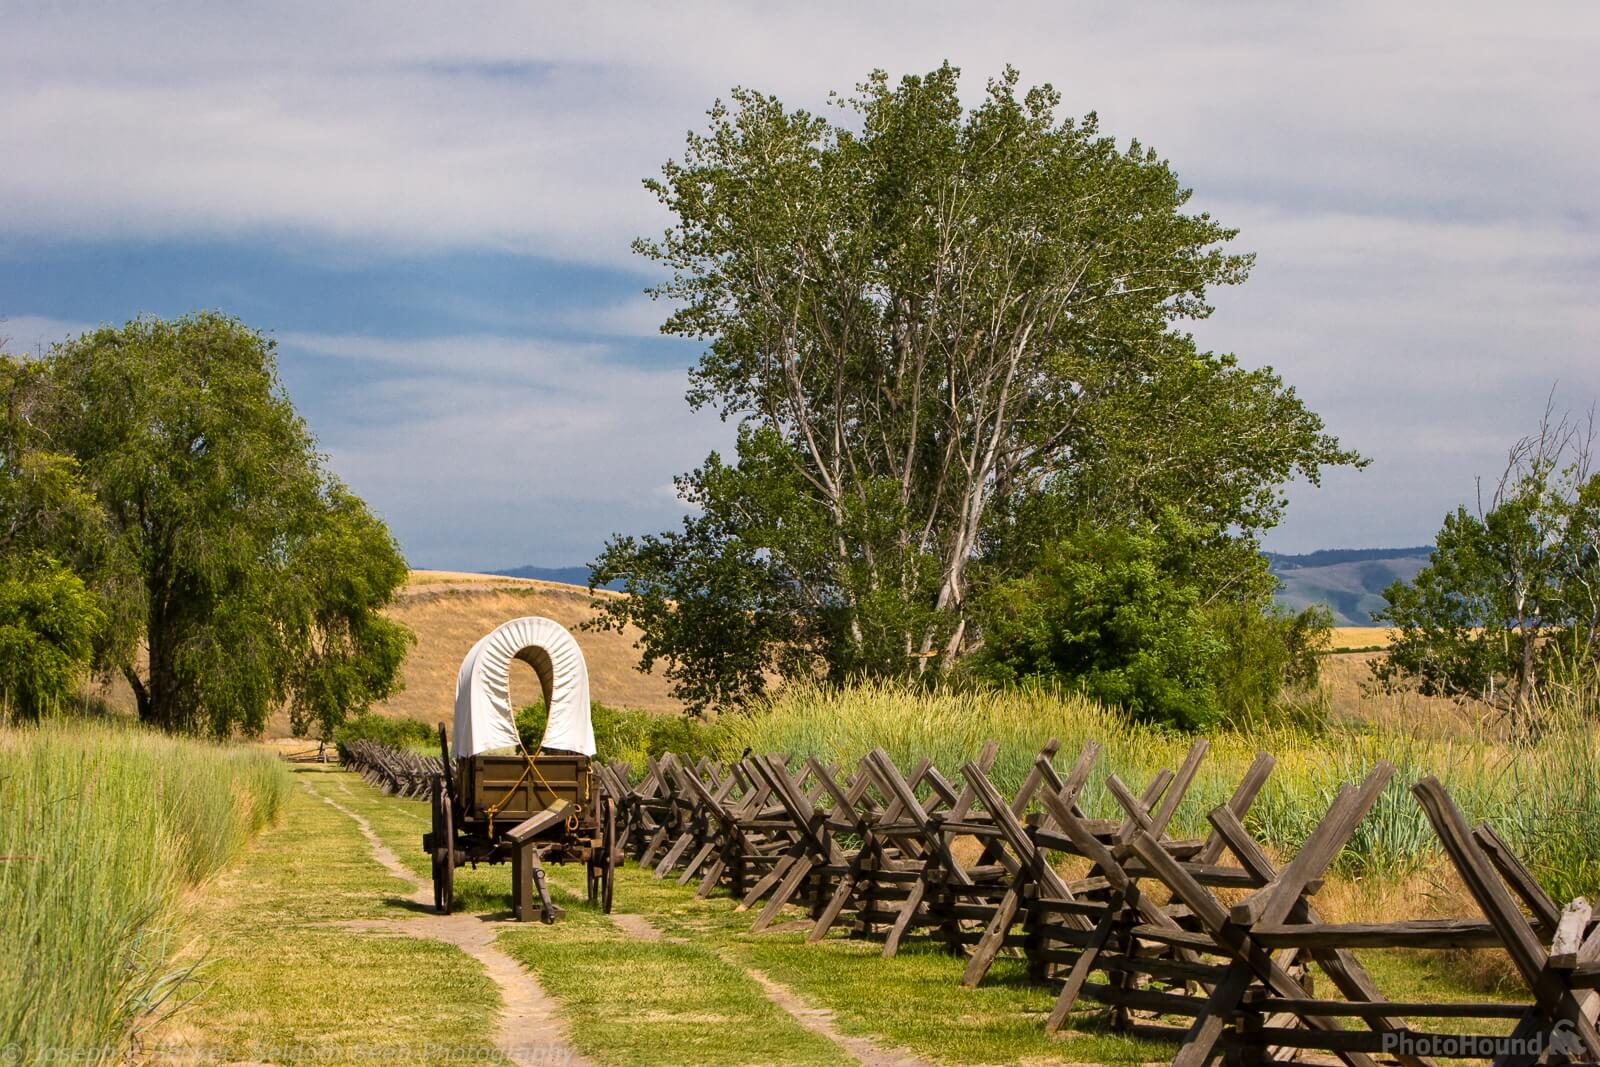 Image of Whitman Mission National Historic Site by Joe Becker